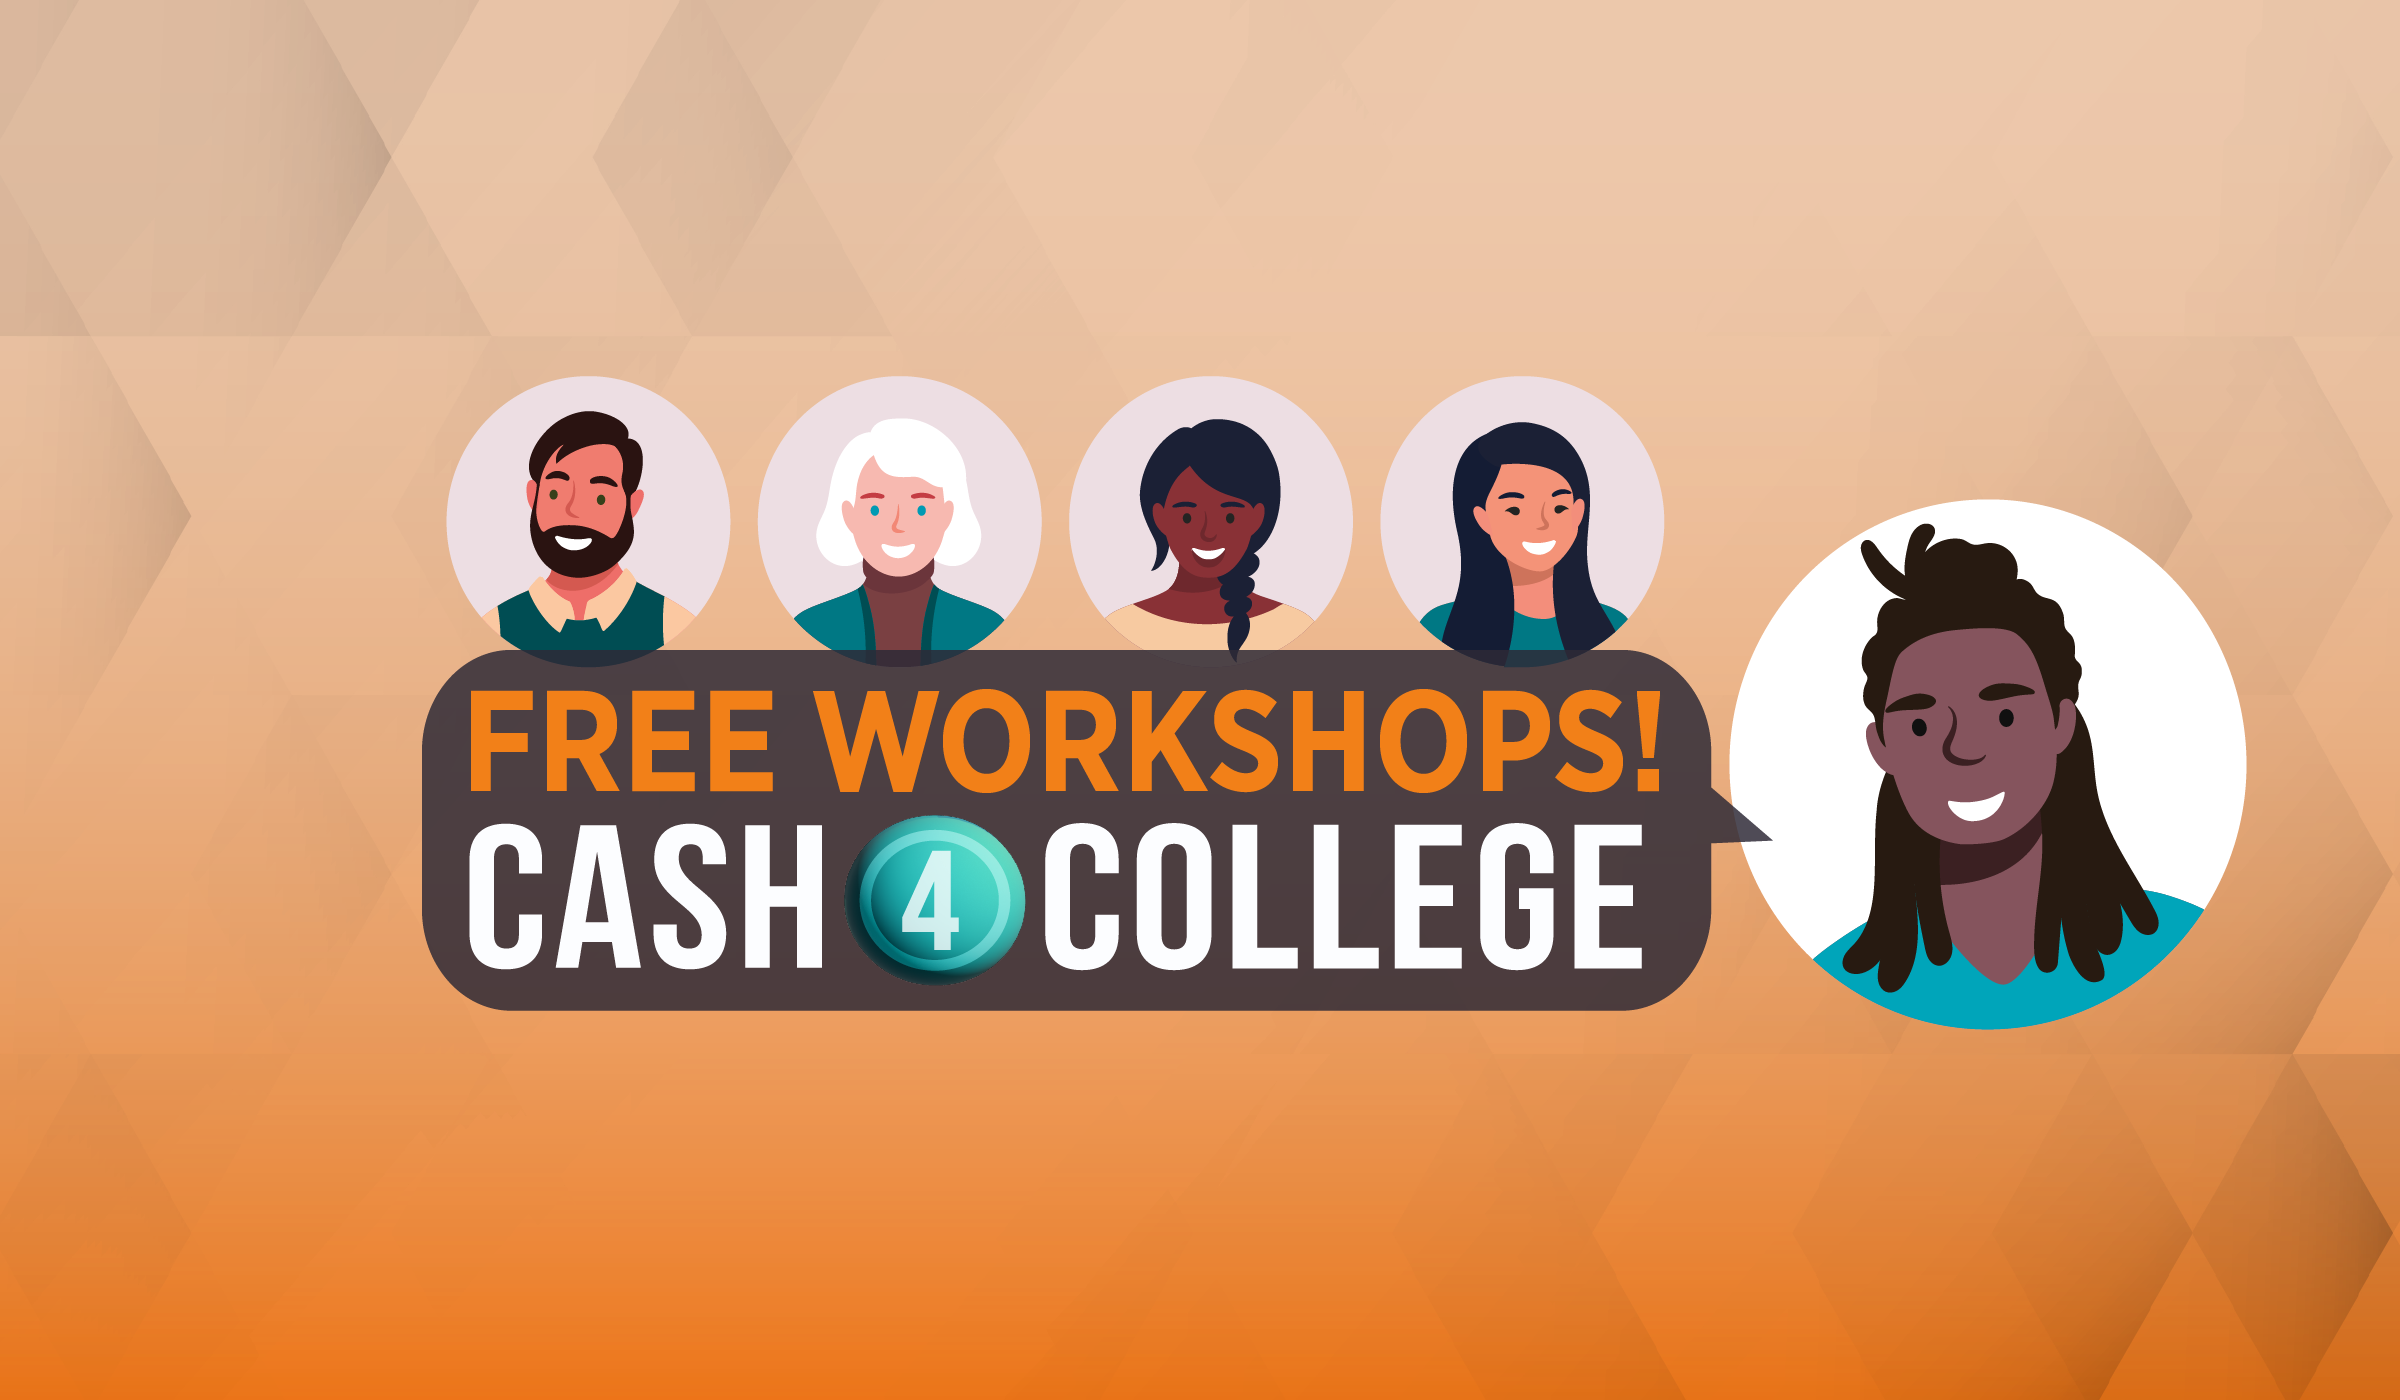 free workshops cash for college with image of 5 different people of various ethnicities